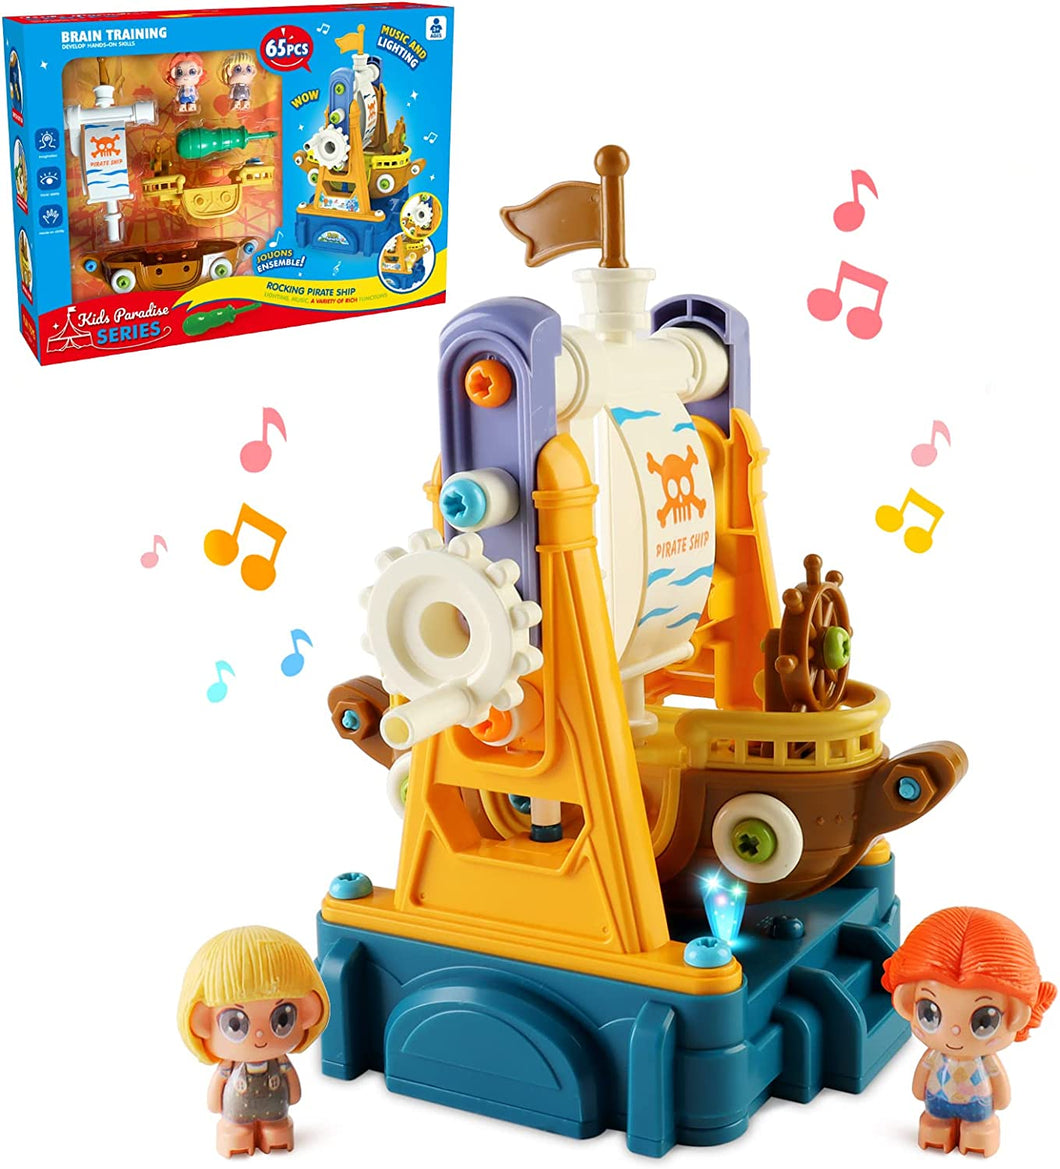 DIY Pirate Ship Building Set with Light and Music Educational Toys for Kids Pirate Construction Toys Gift for Christmas Birthdays-DIYAP-2